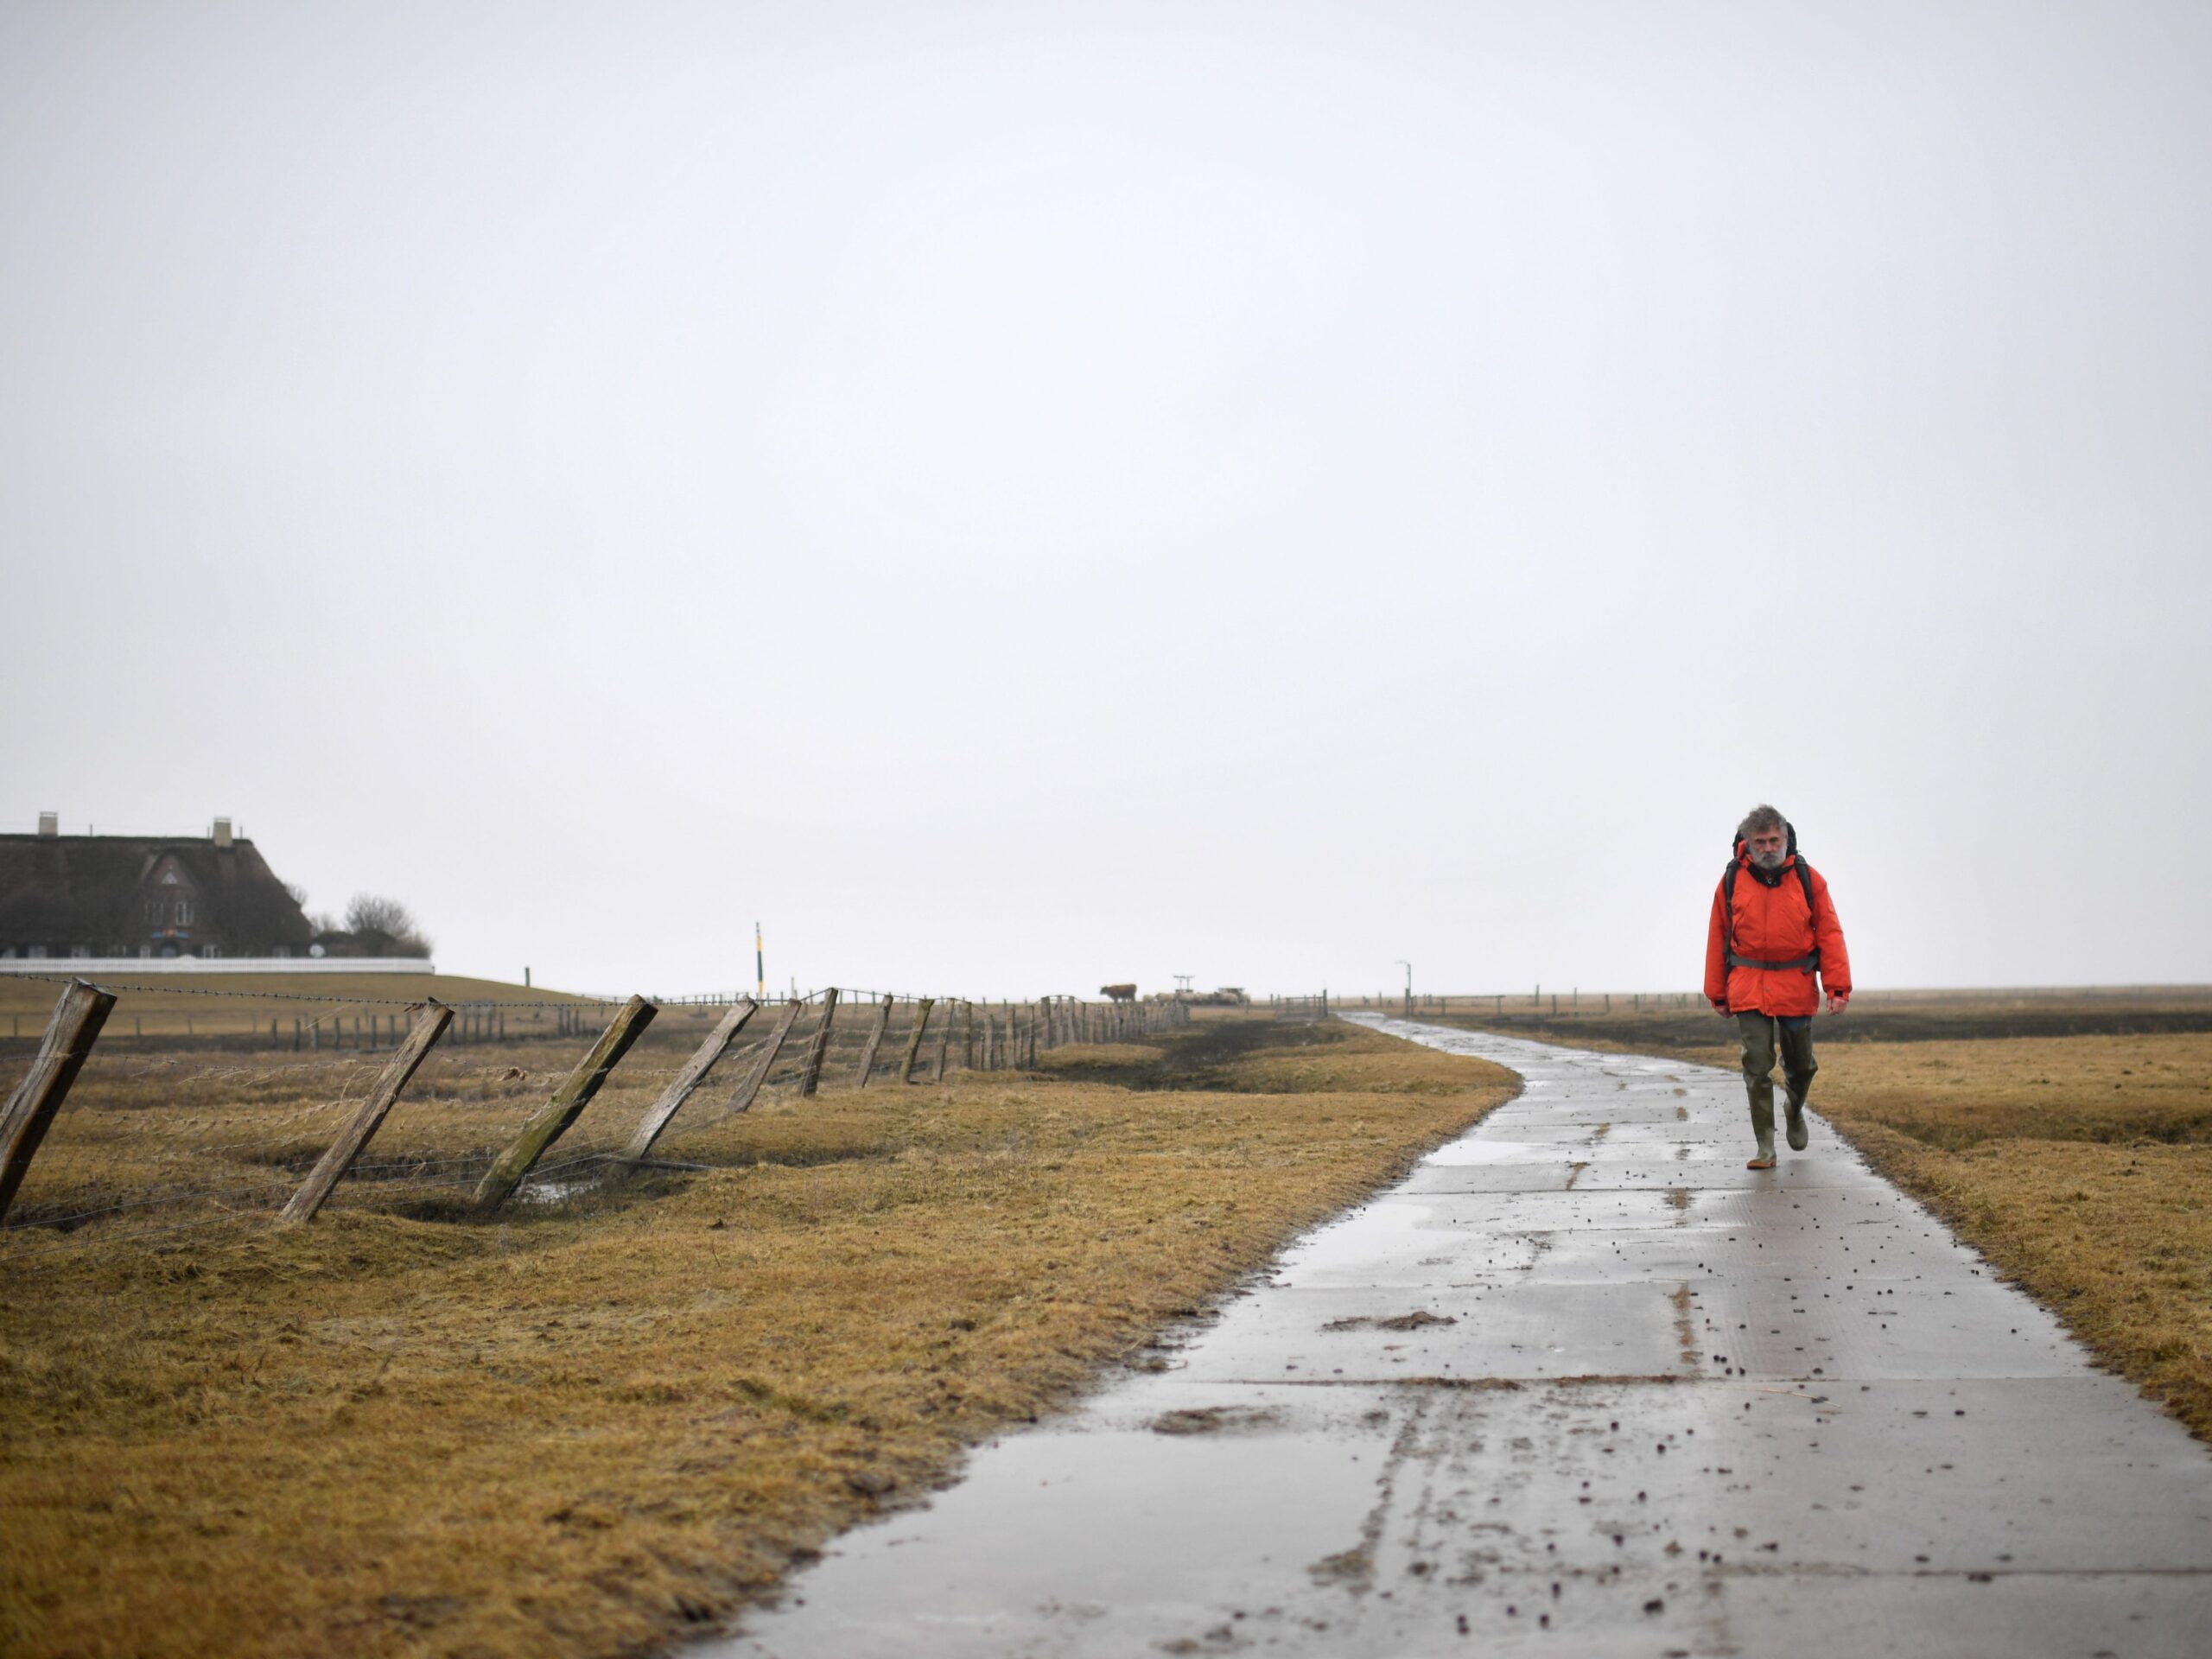 An older man wearing a red jacket walks toward the camera on a paved road running through a field.